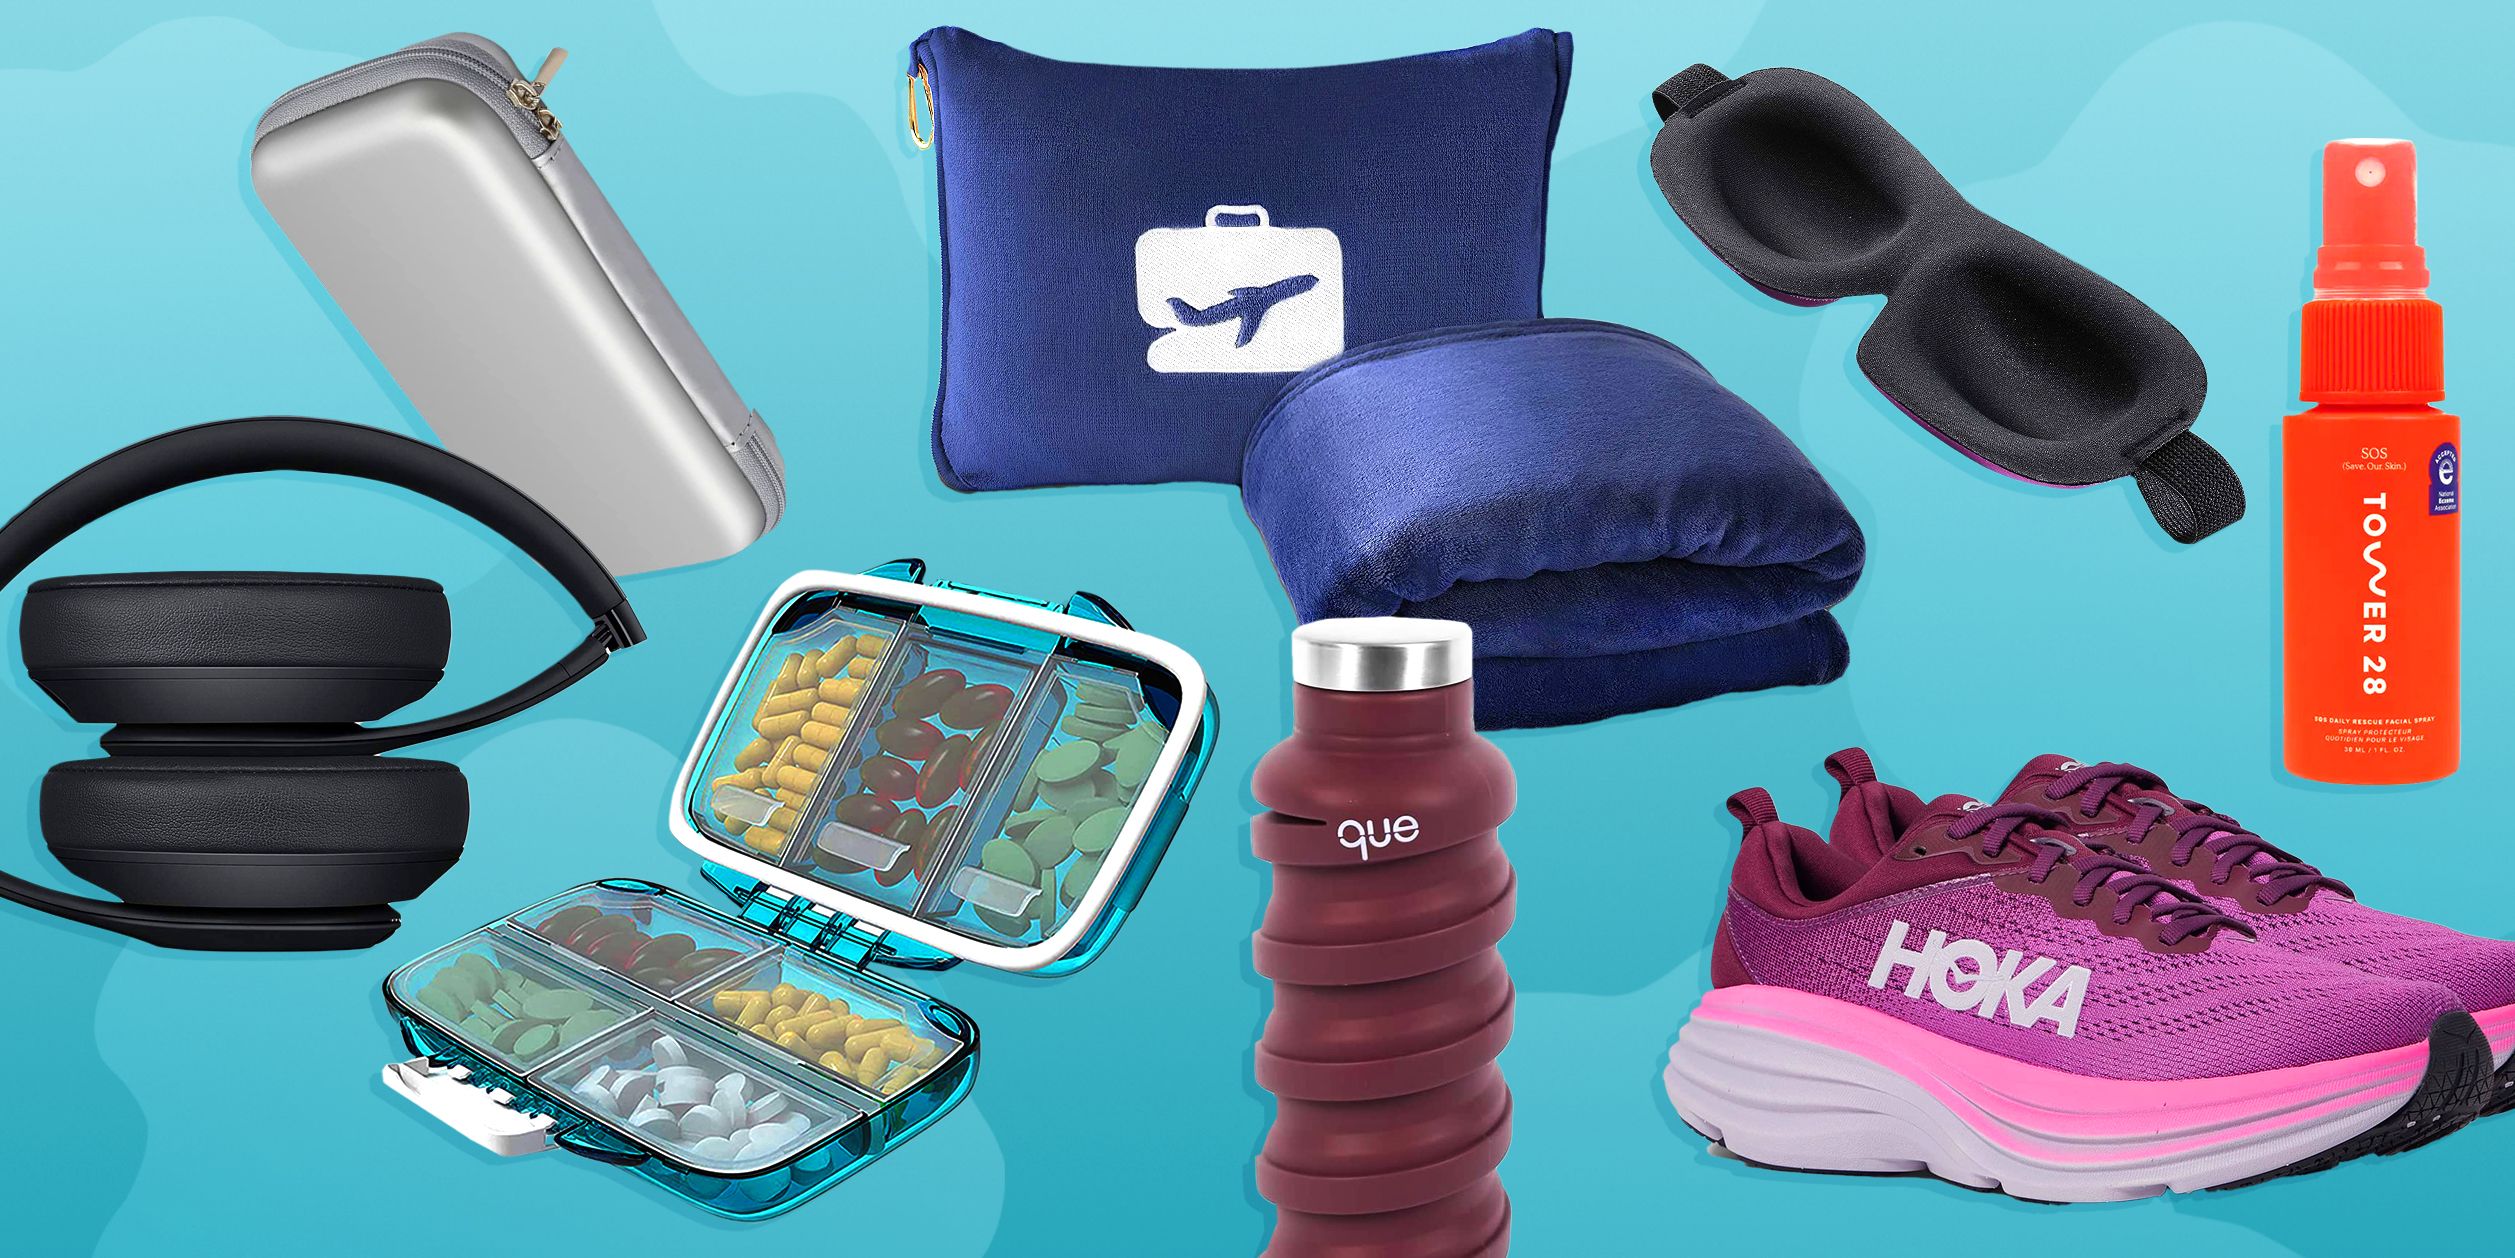 Products to Make a Long-Haul Flight More Comfortable, According to